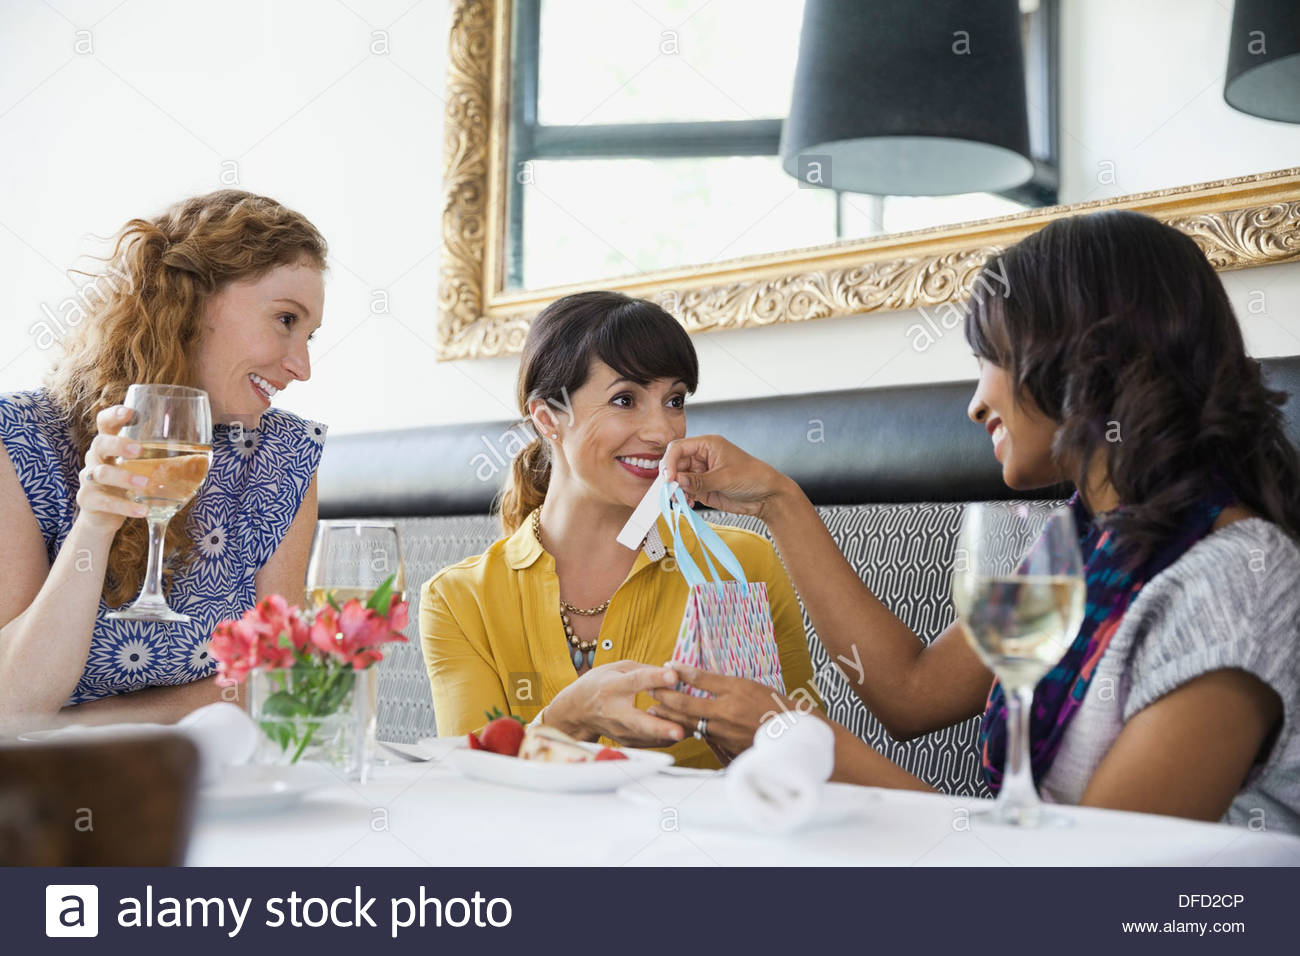 Woman giving gift bag to female friend in restaurant Stock Photo